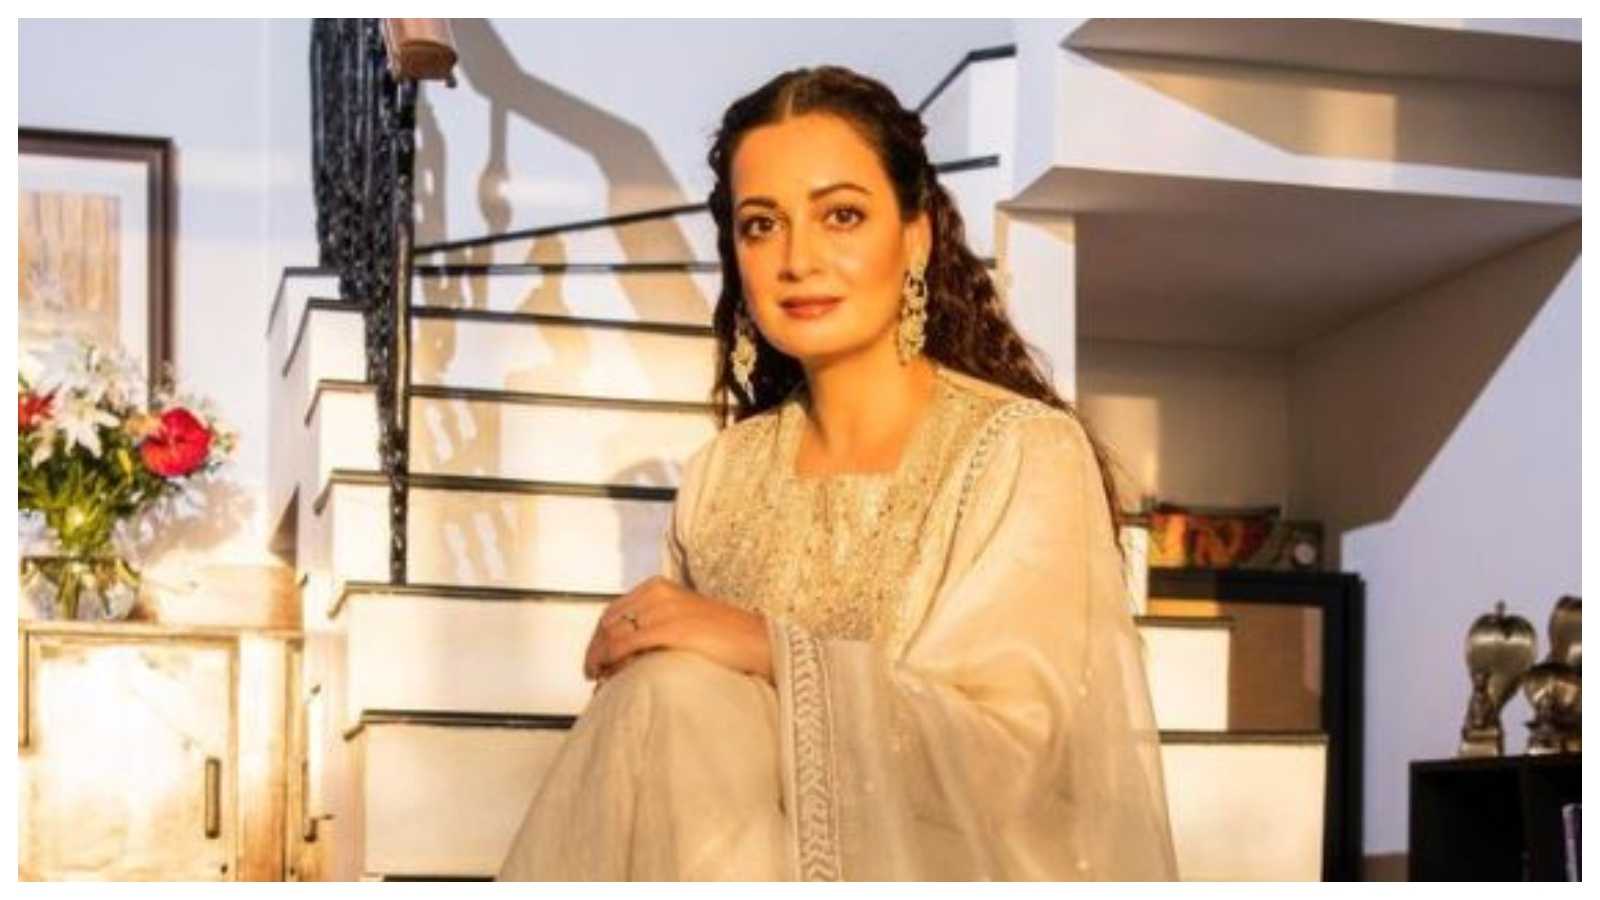 Dia Mirza is upset with Twitter, says doesn’t have blue tick despite subscription; netizens react